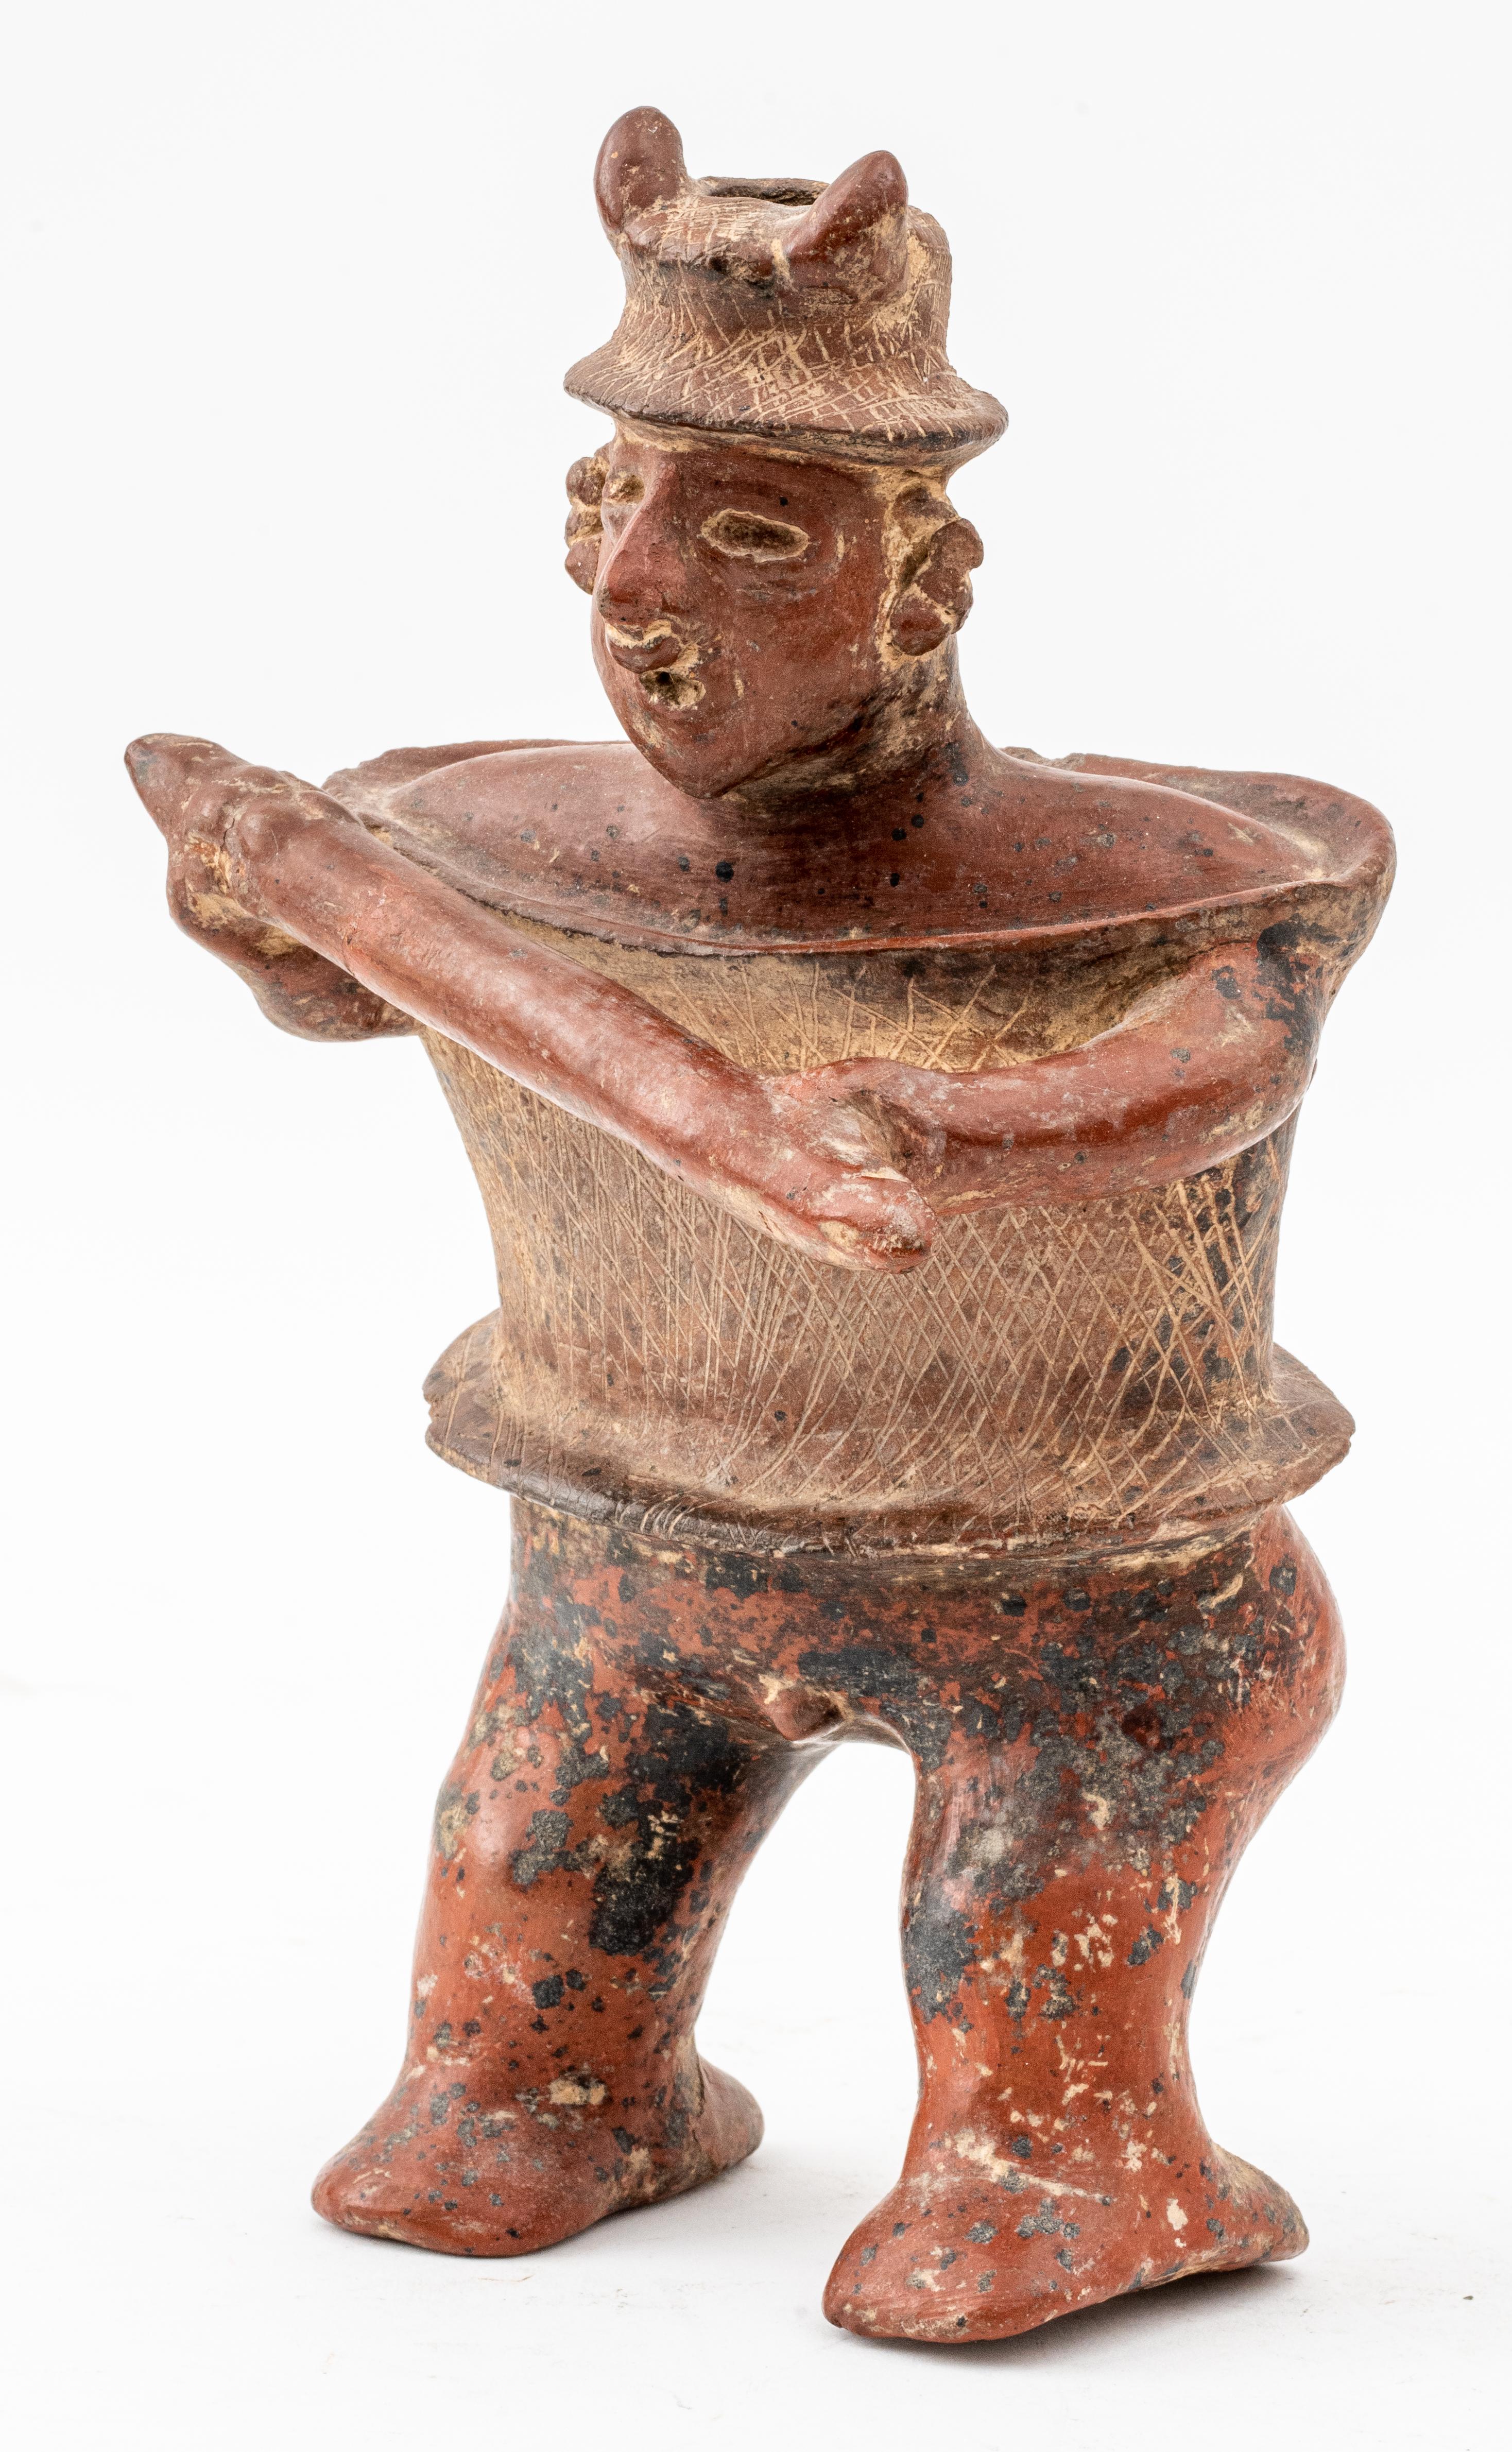 Ceramic redware figure in the form of a warrior wielding a staff, textured etching to hat and breastplate, spout opening at head, probably pre Columbian earthenware.

Measurements: 11